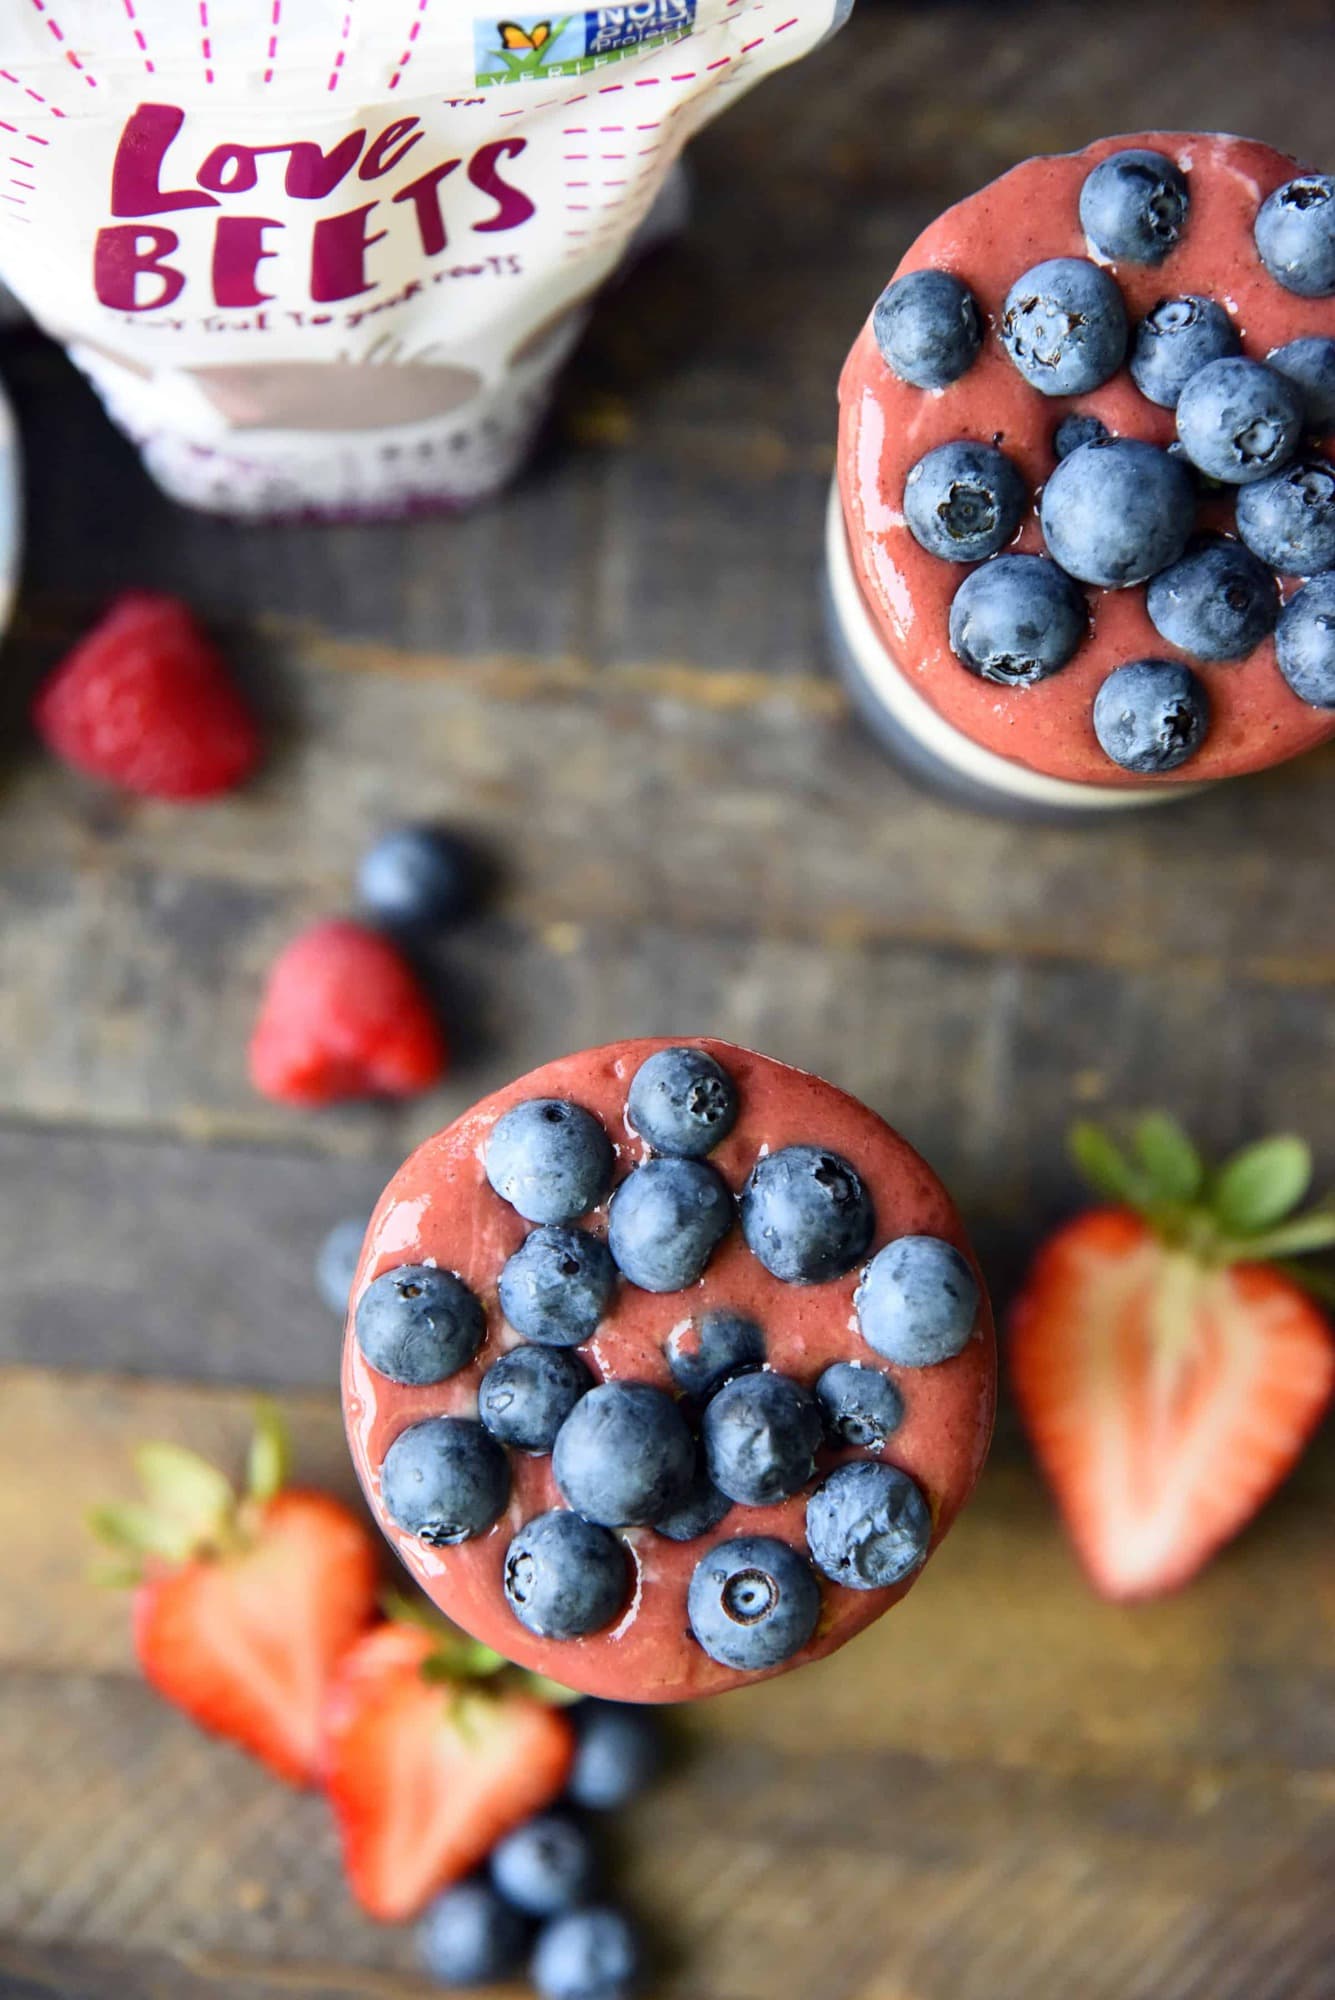 Overhead of red white and blue layered smoothies topped with blueberries on a wood background